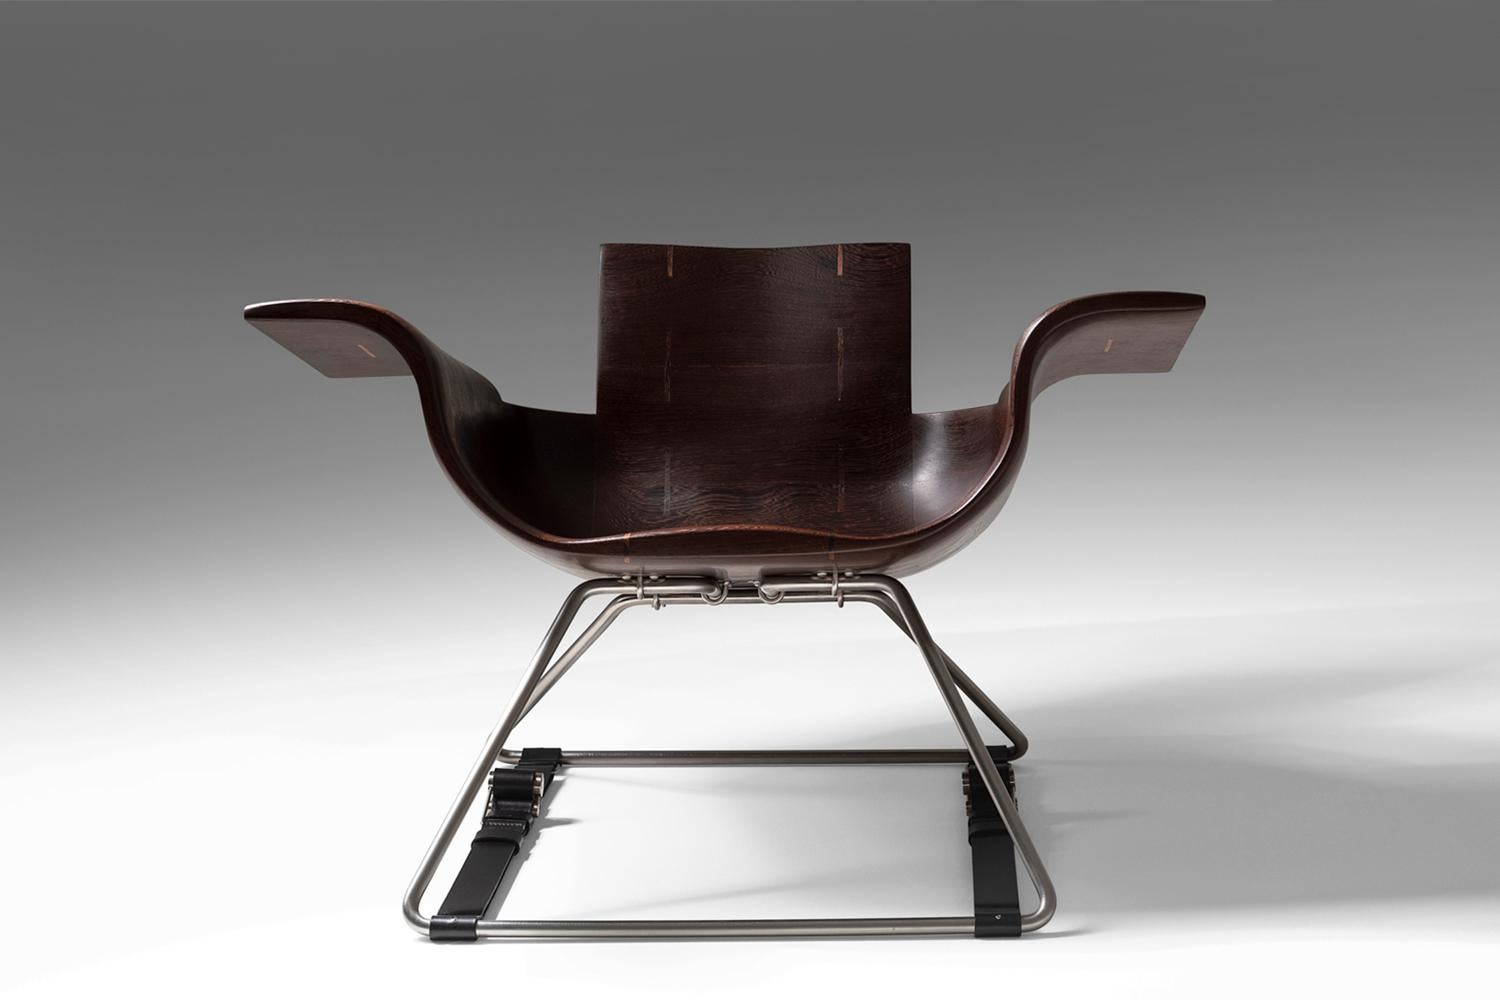 Woodwork Roadster Armchair with Footstool made out of Wenge Wood. Handcrafted in Poland. For Sale